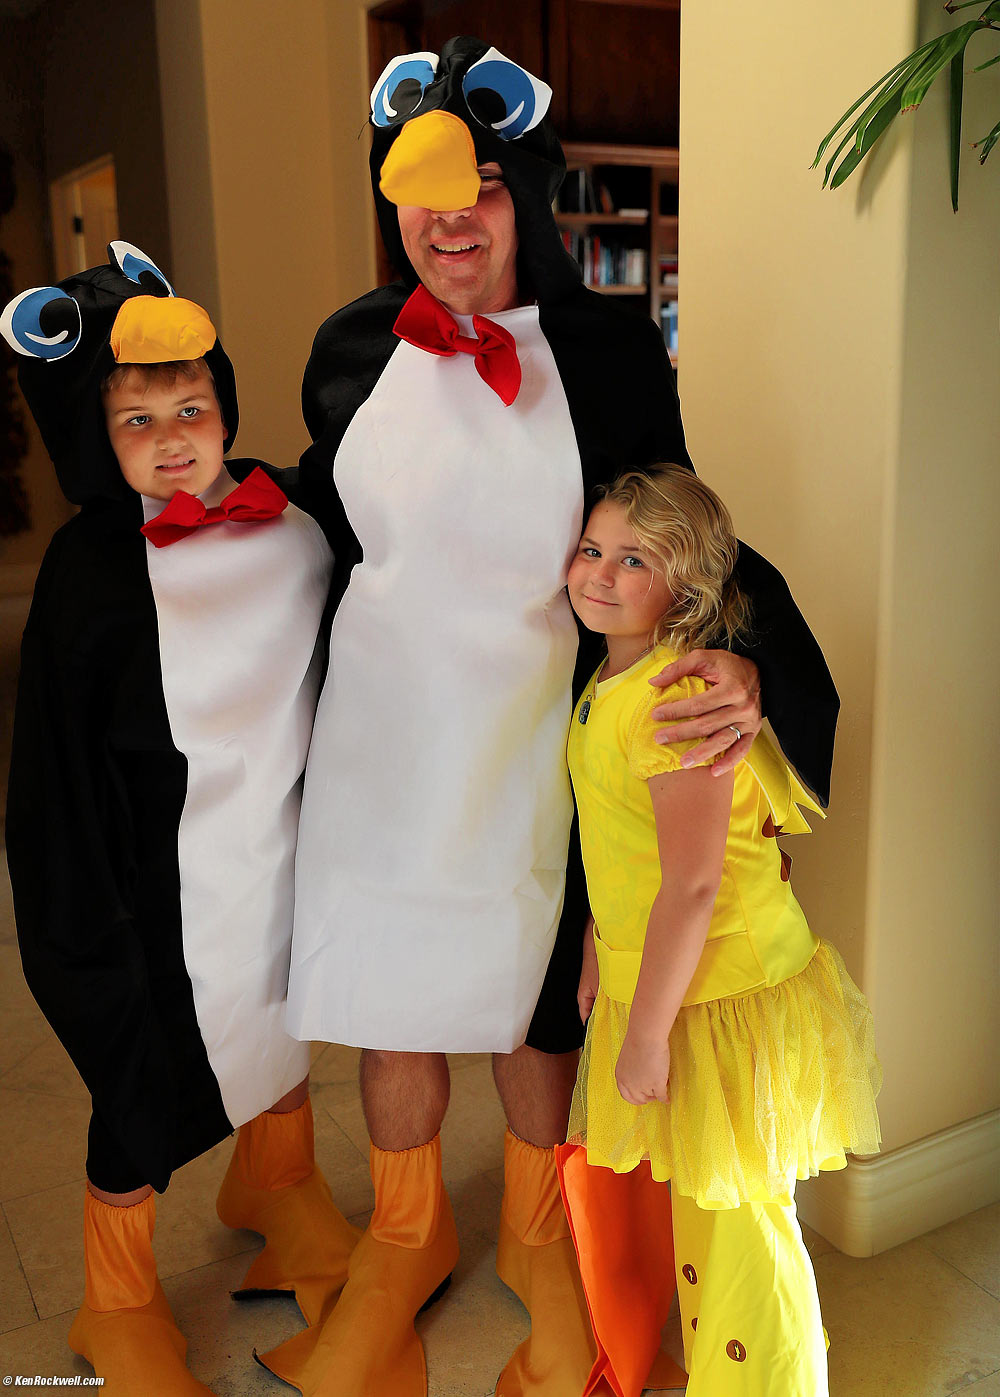 Ryan, Dad and Katie in their Halloween costumes